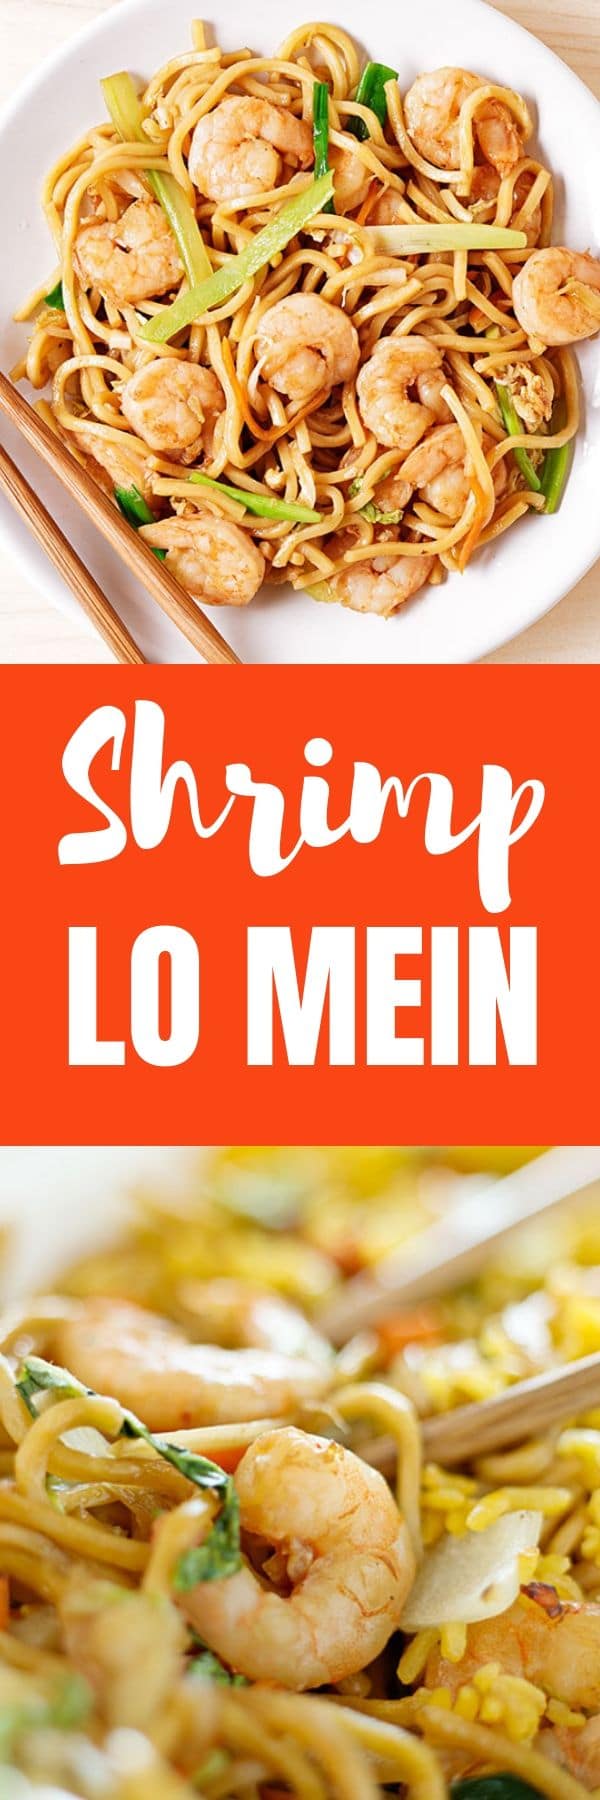 Delicious Shrimp Lo Mein In 13 Minutes [Step By Step Recipe]